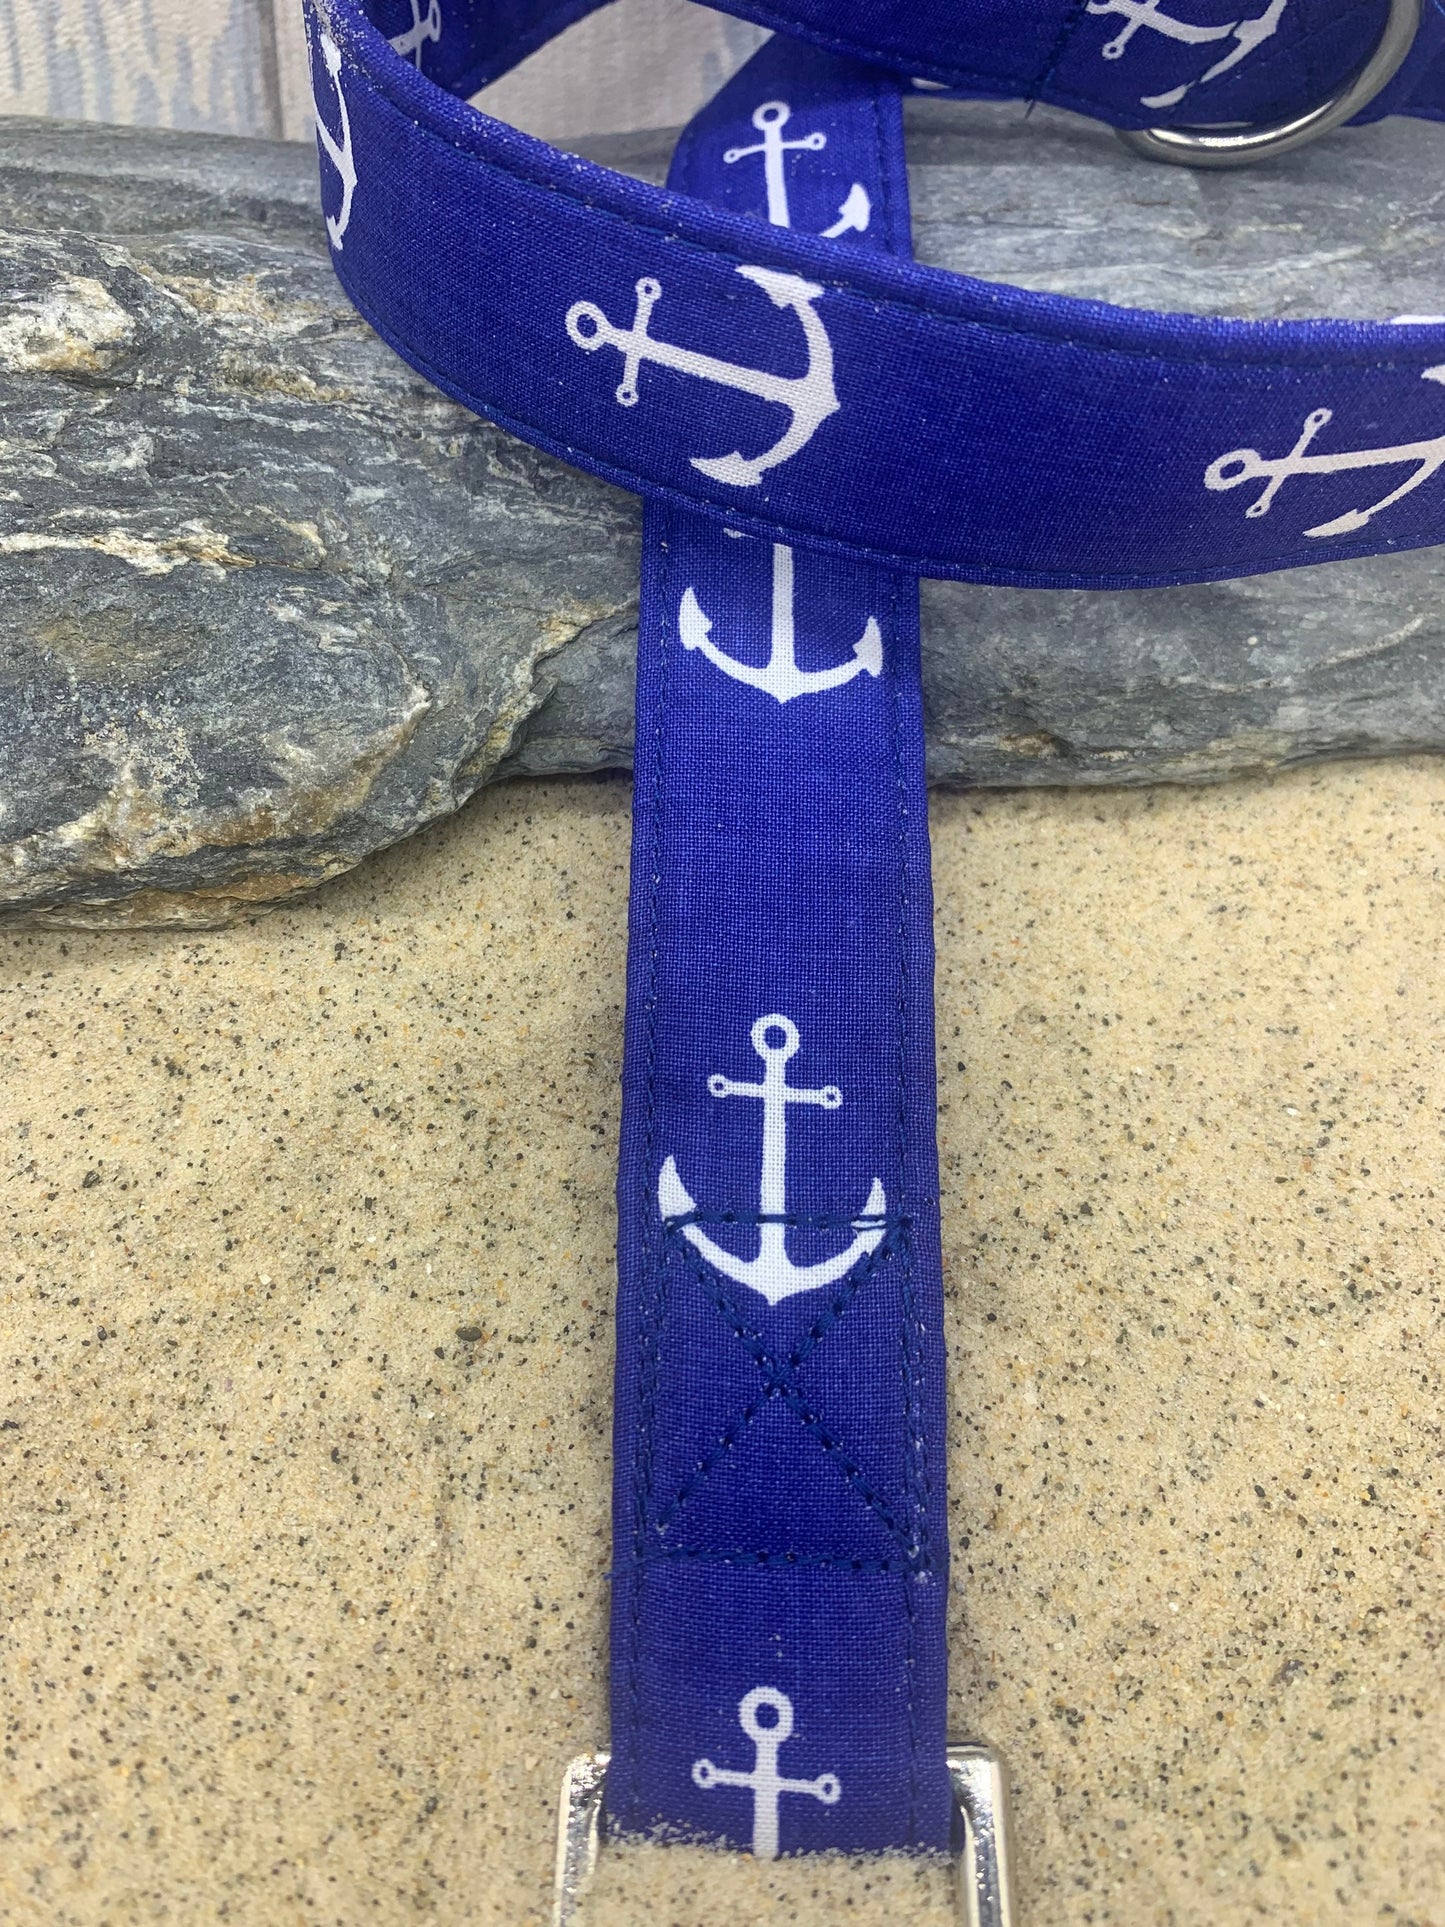 Royal blue anchor handmade dog lead with d ring